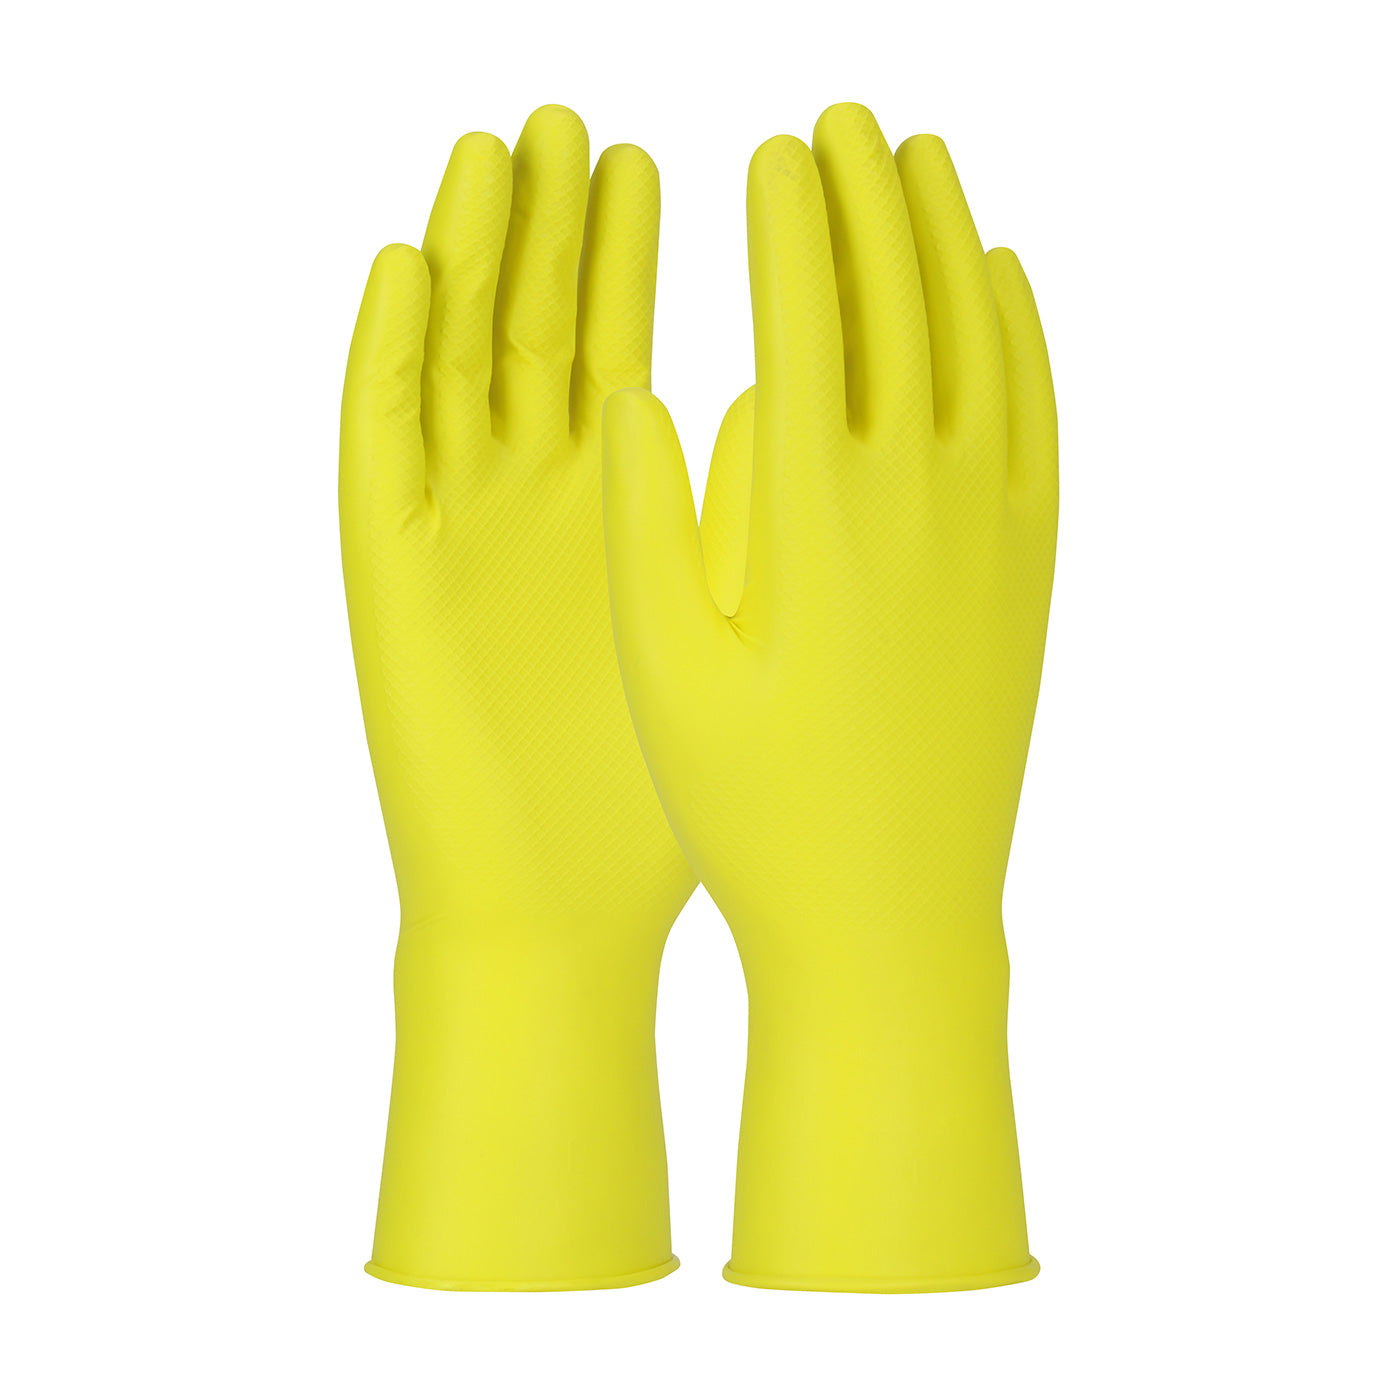 Grippaz 67-306/XL Extended Use Ambidextrous Nitrile Glove with Textured Fish Scale Grip - 6 Mil